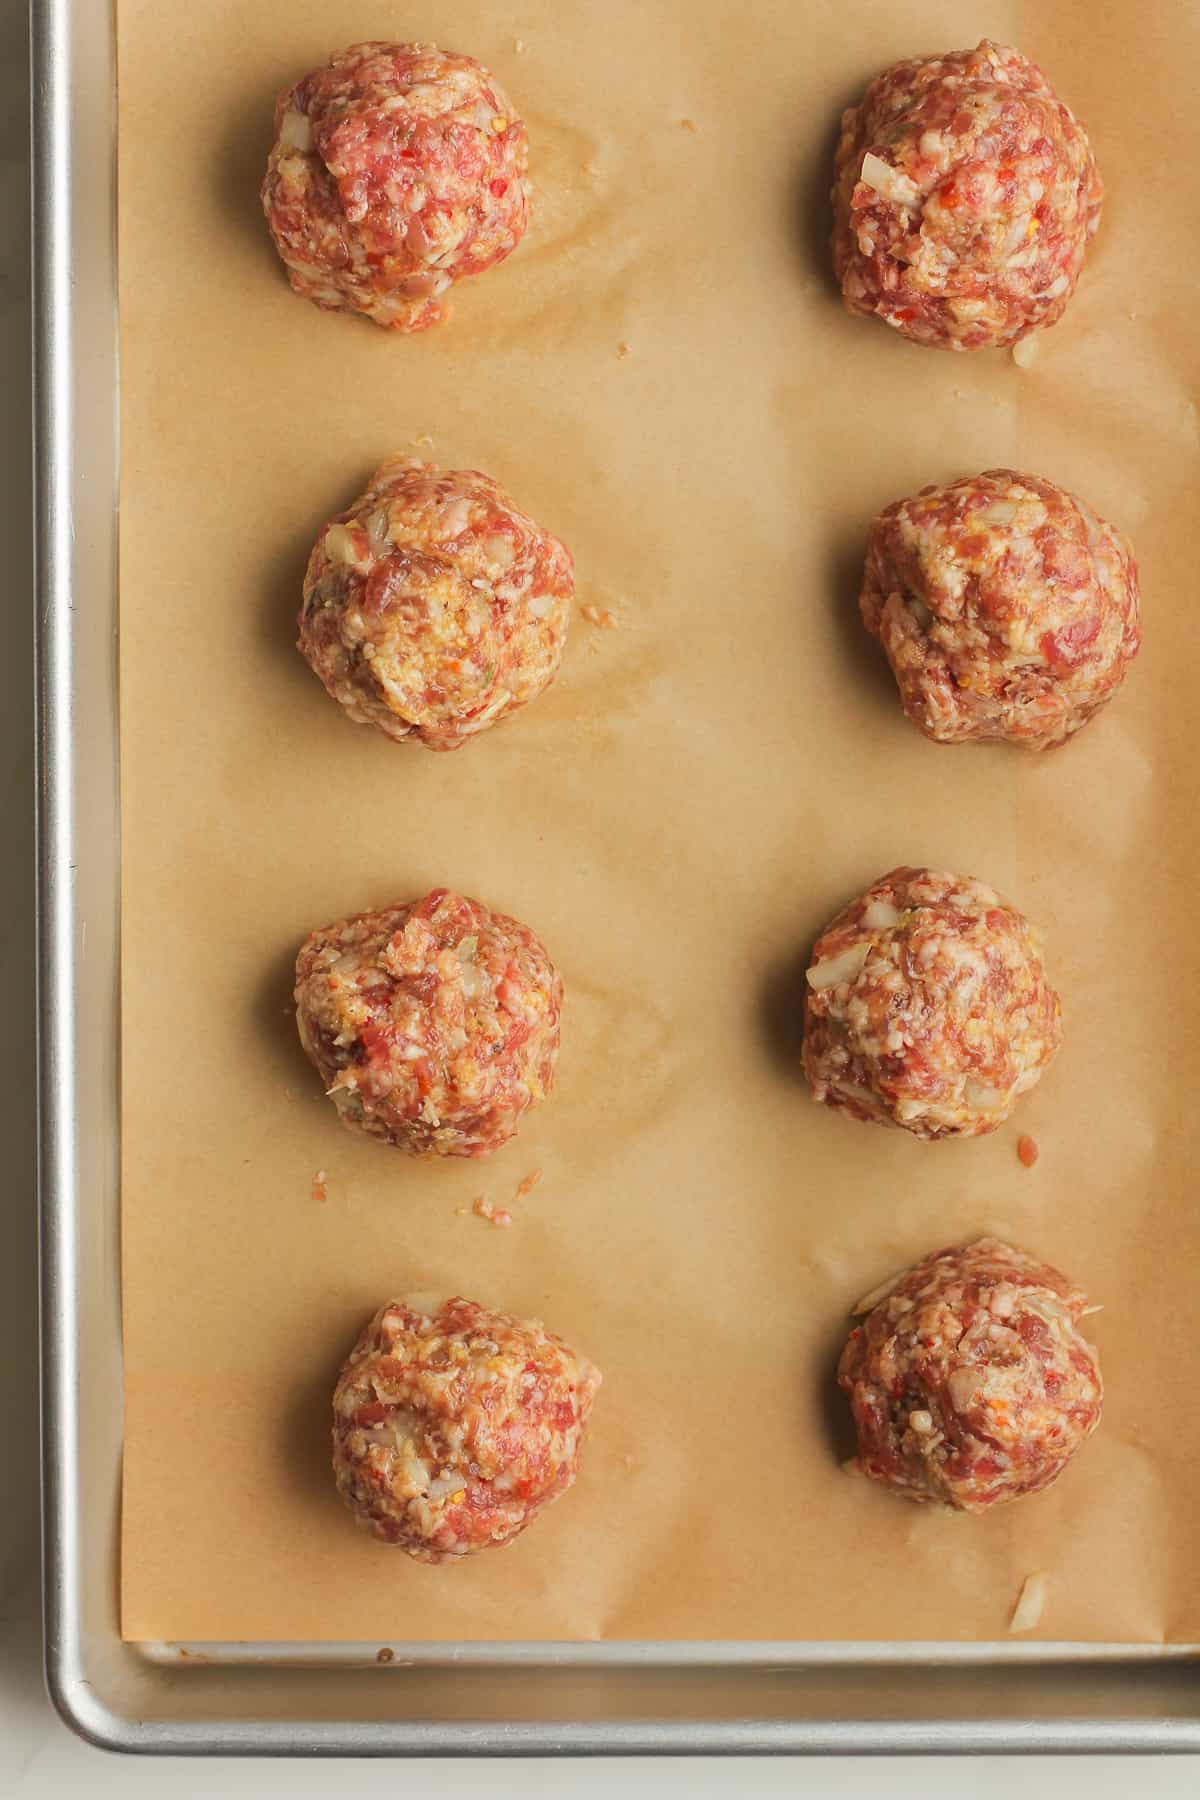 8 raw sausage meatballs on a baking tray.